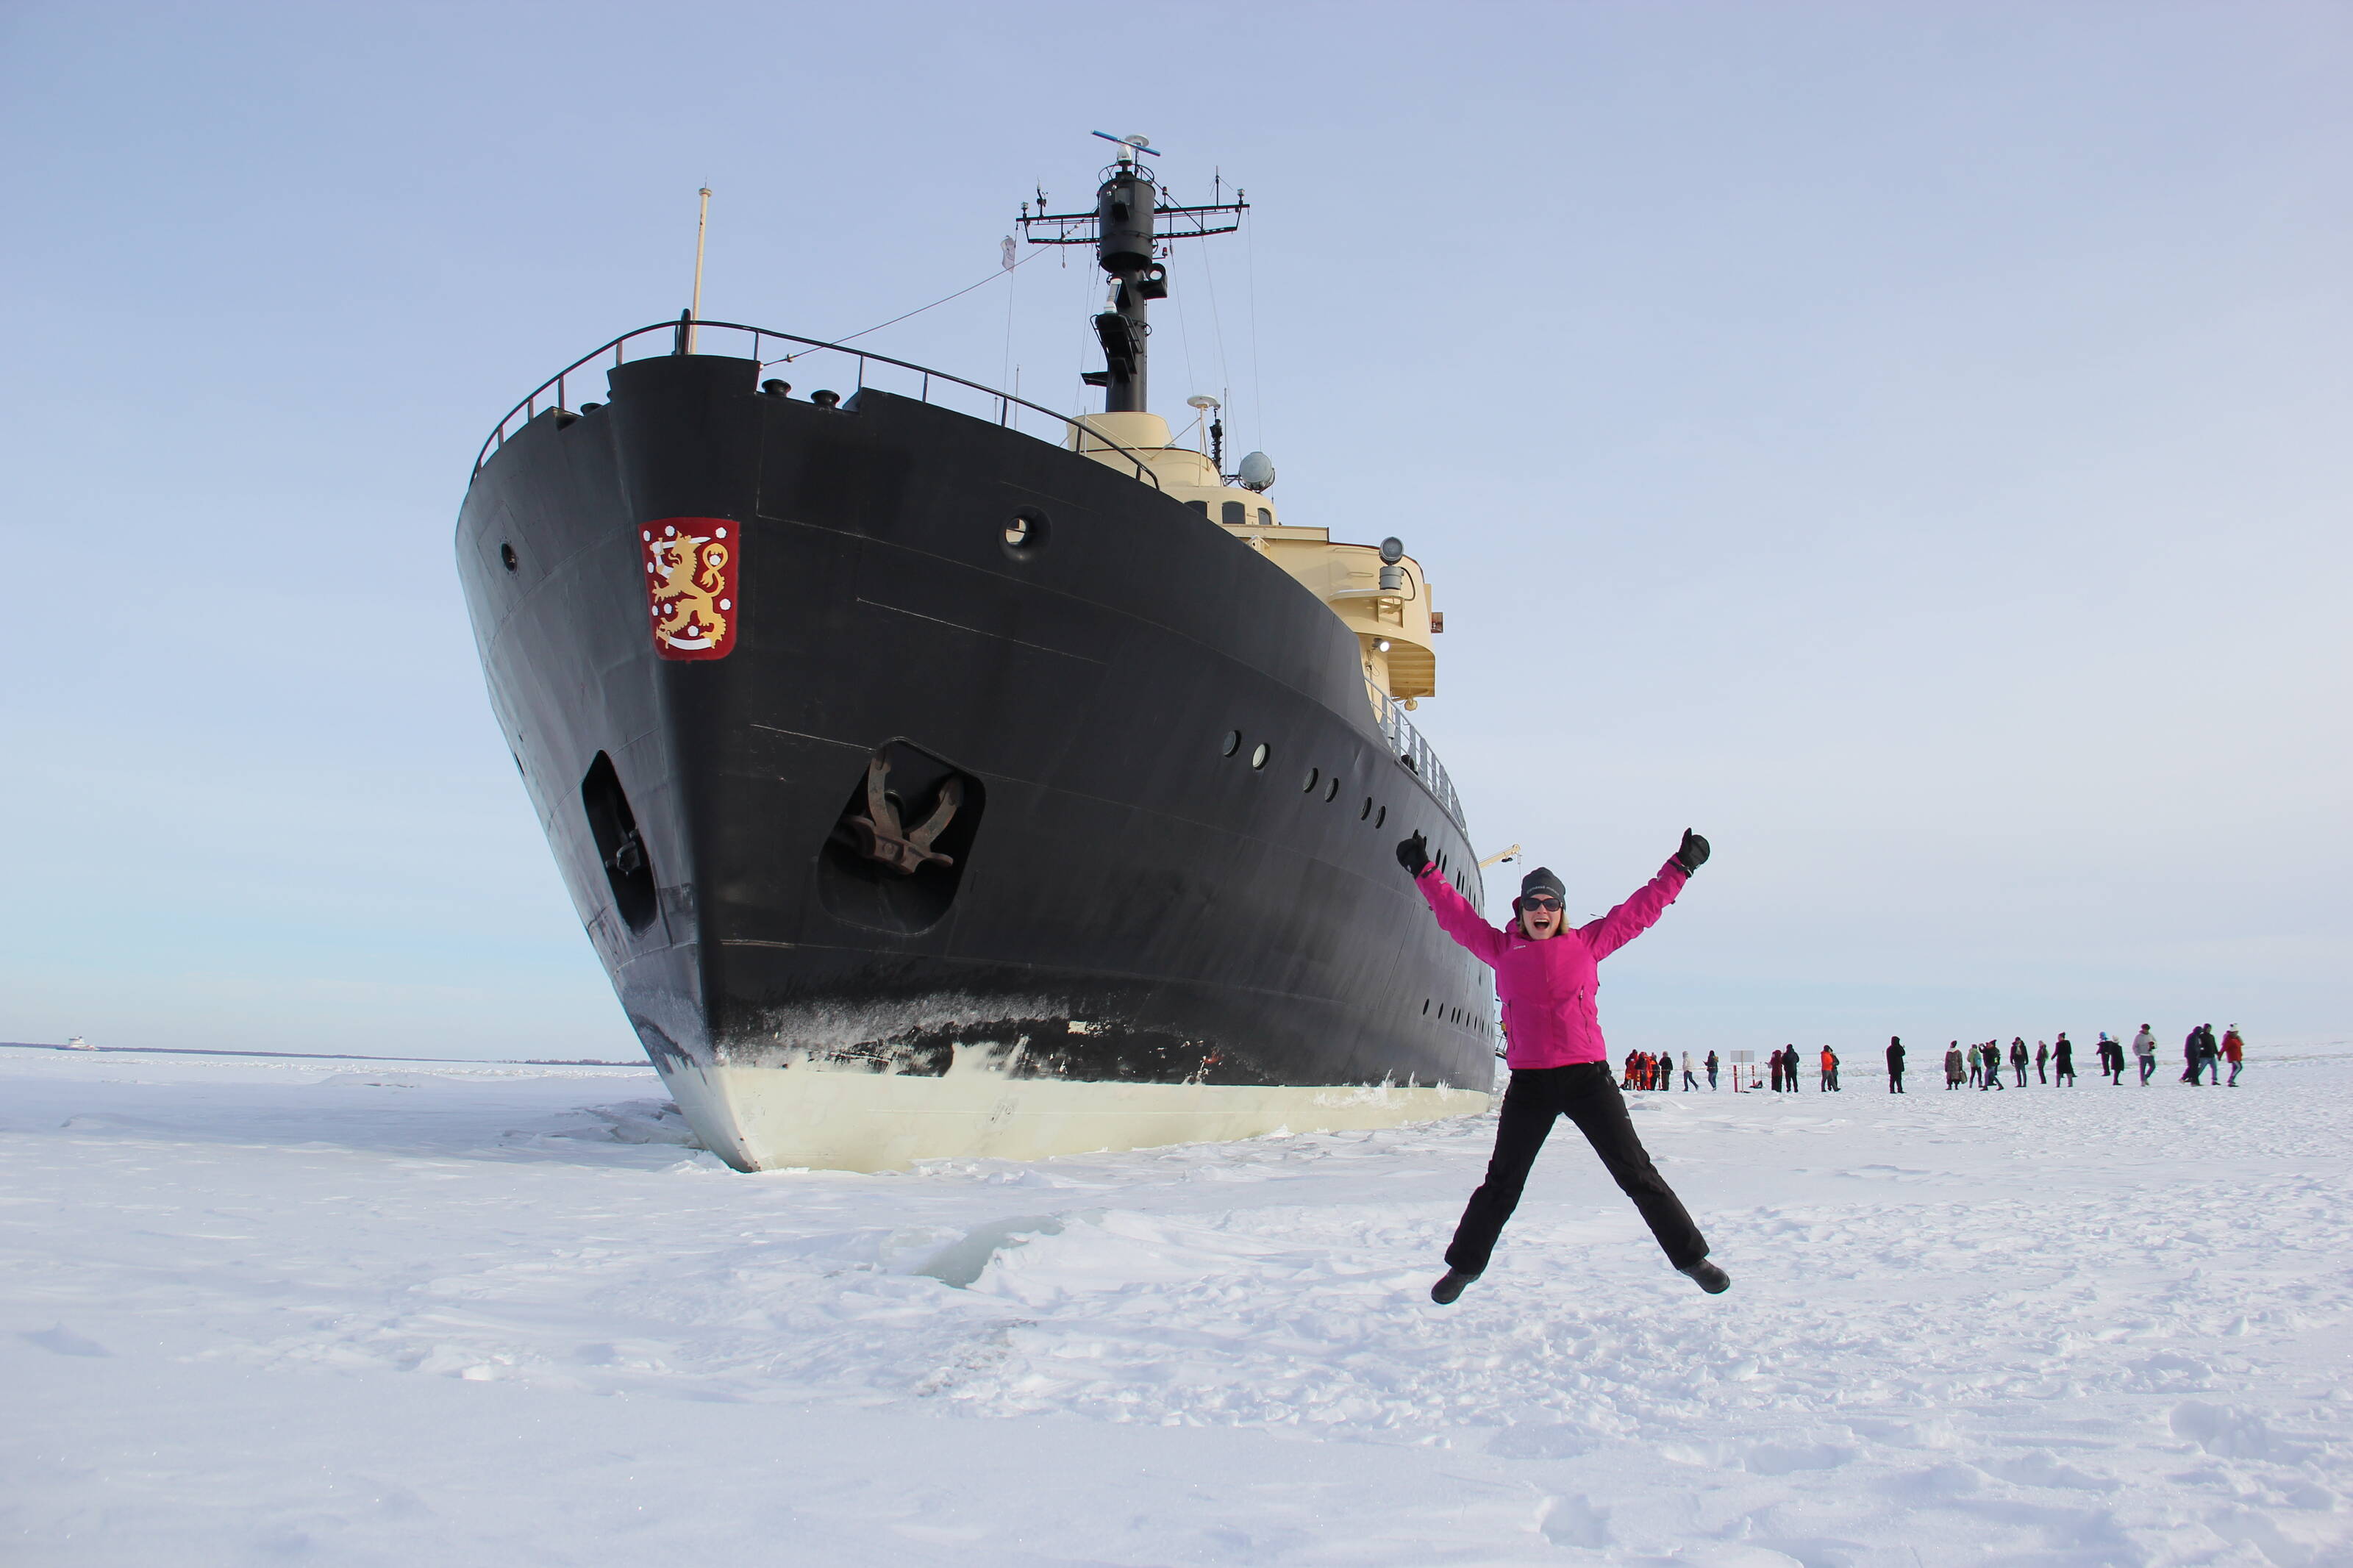 Icebreaker ships are helping Lapland to become a year-round destination